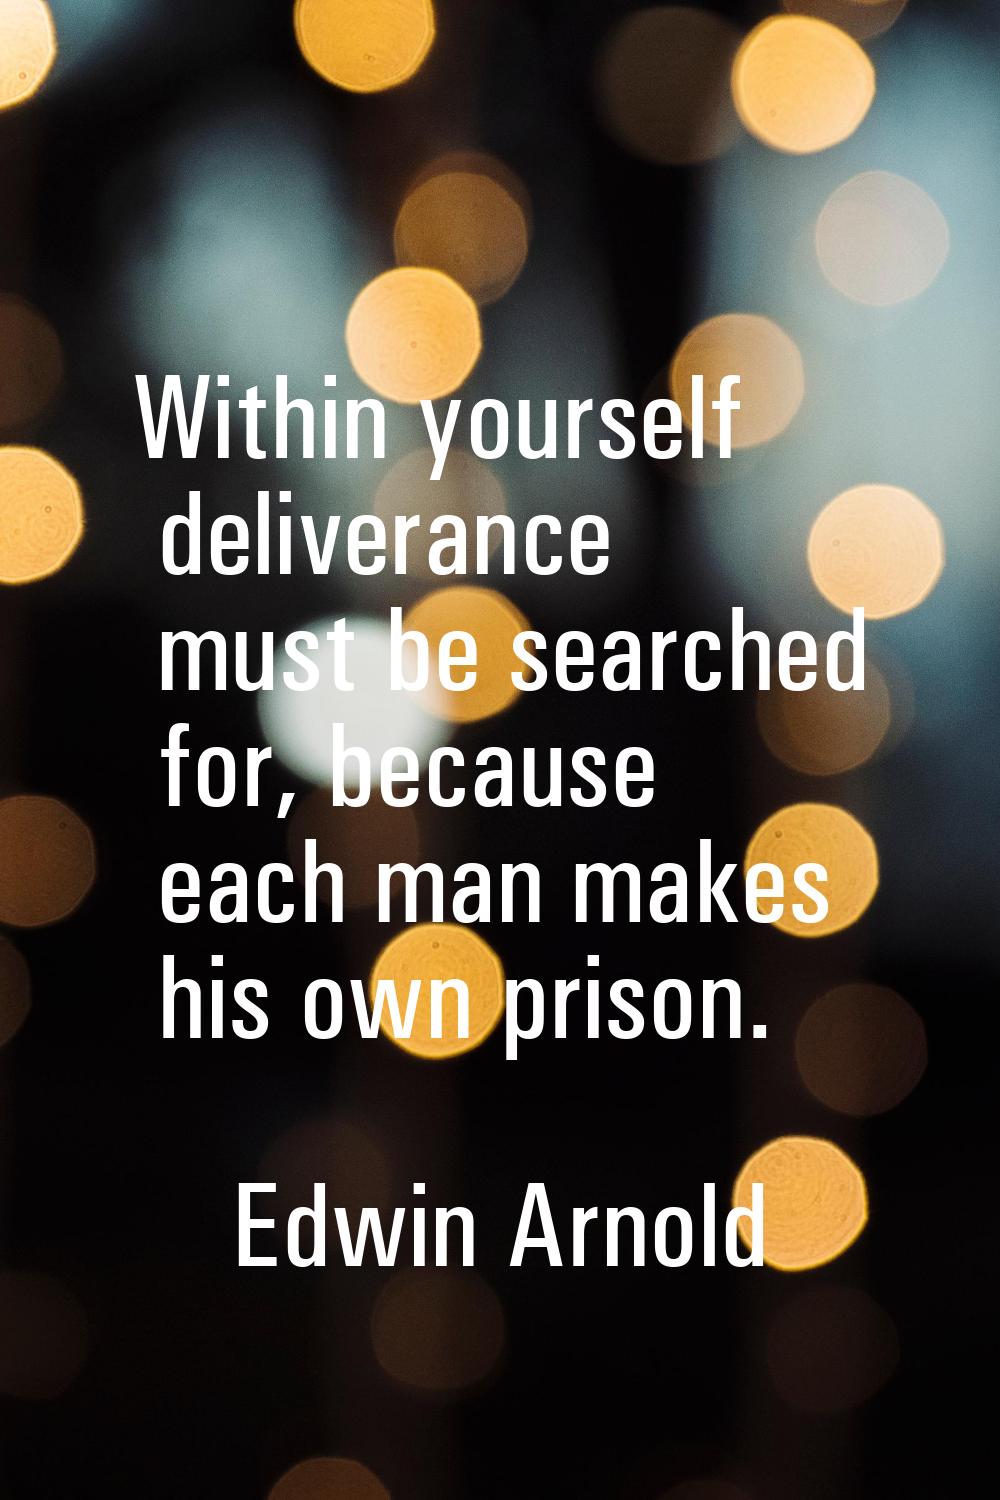 Within yourself deliverance must be searched for, because each man makes his own prison.